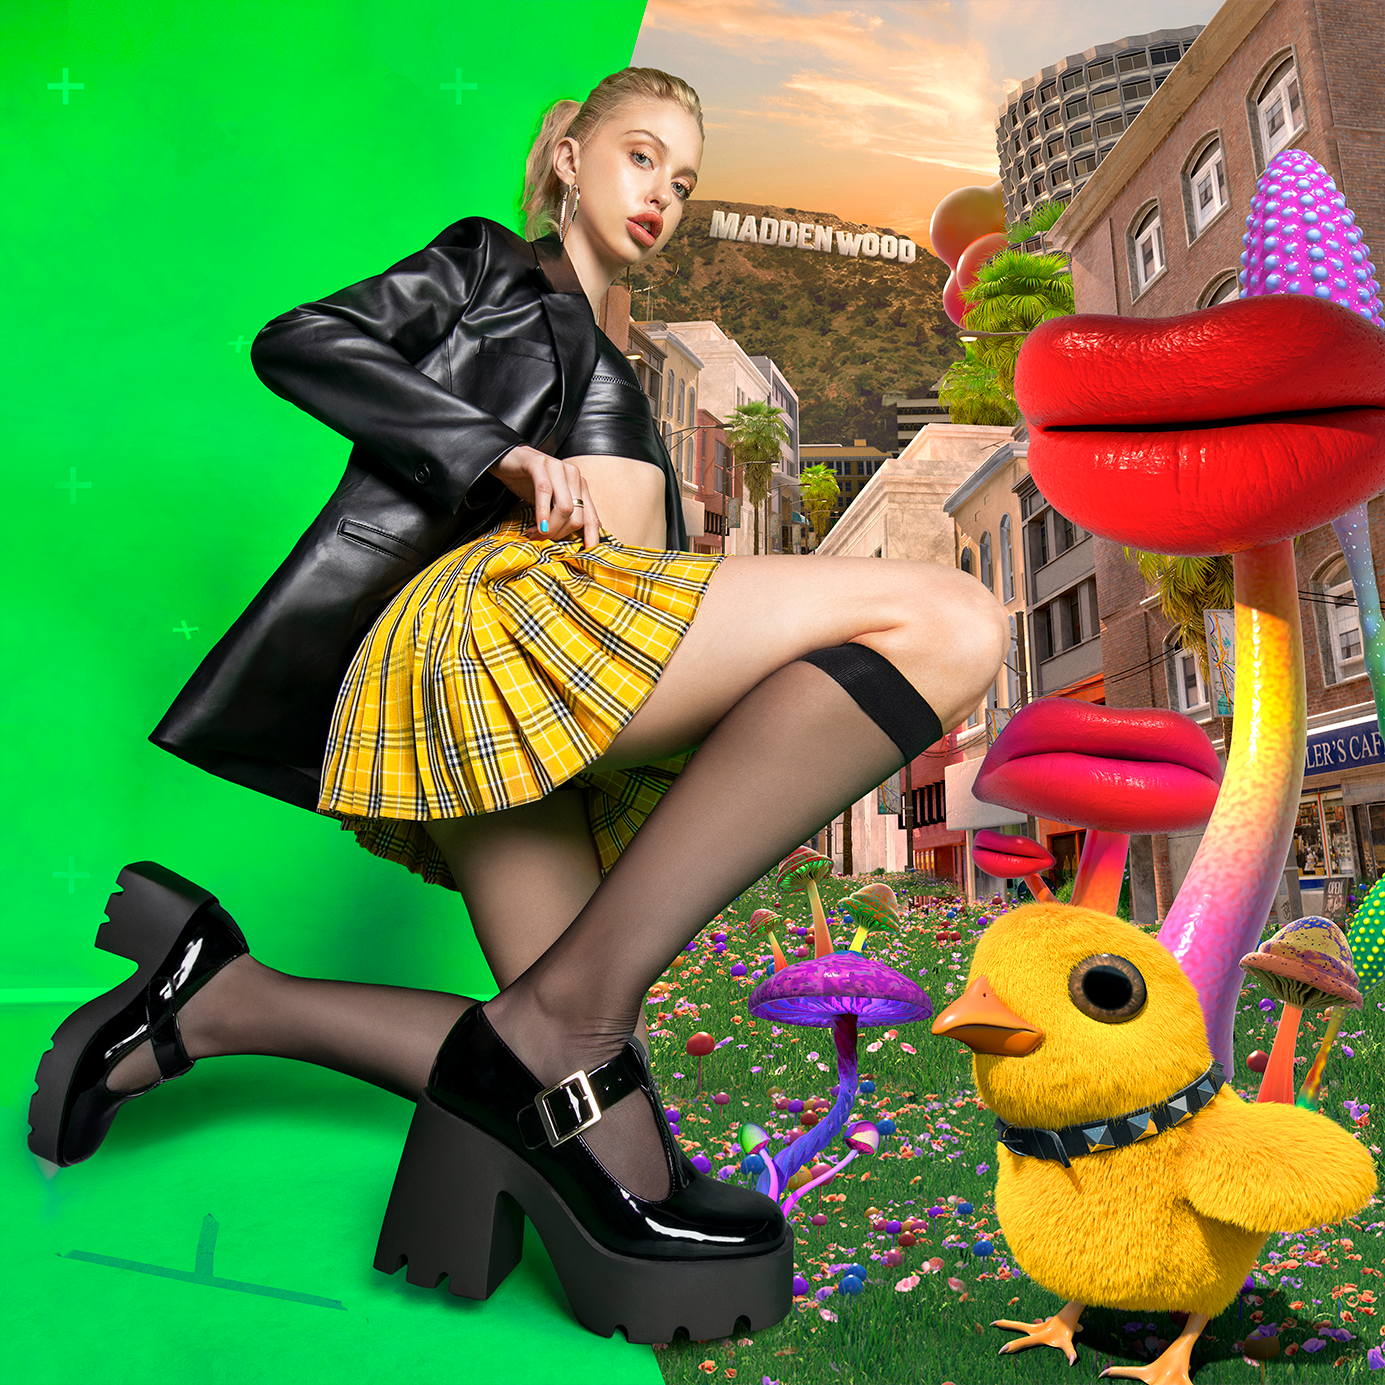 Steve Madden Launches Maddenwood Augmented Reality Campaign — Shop